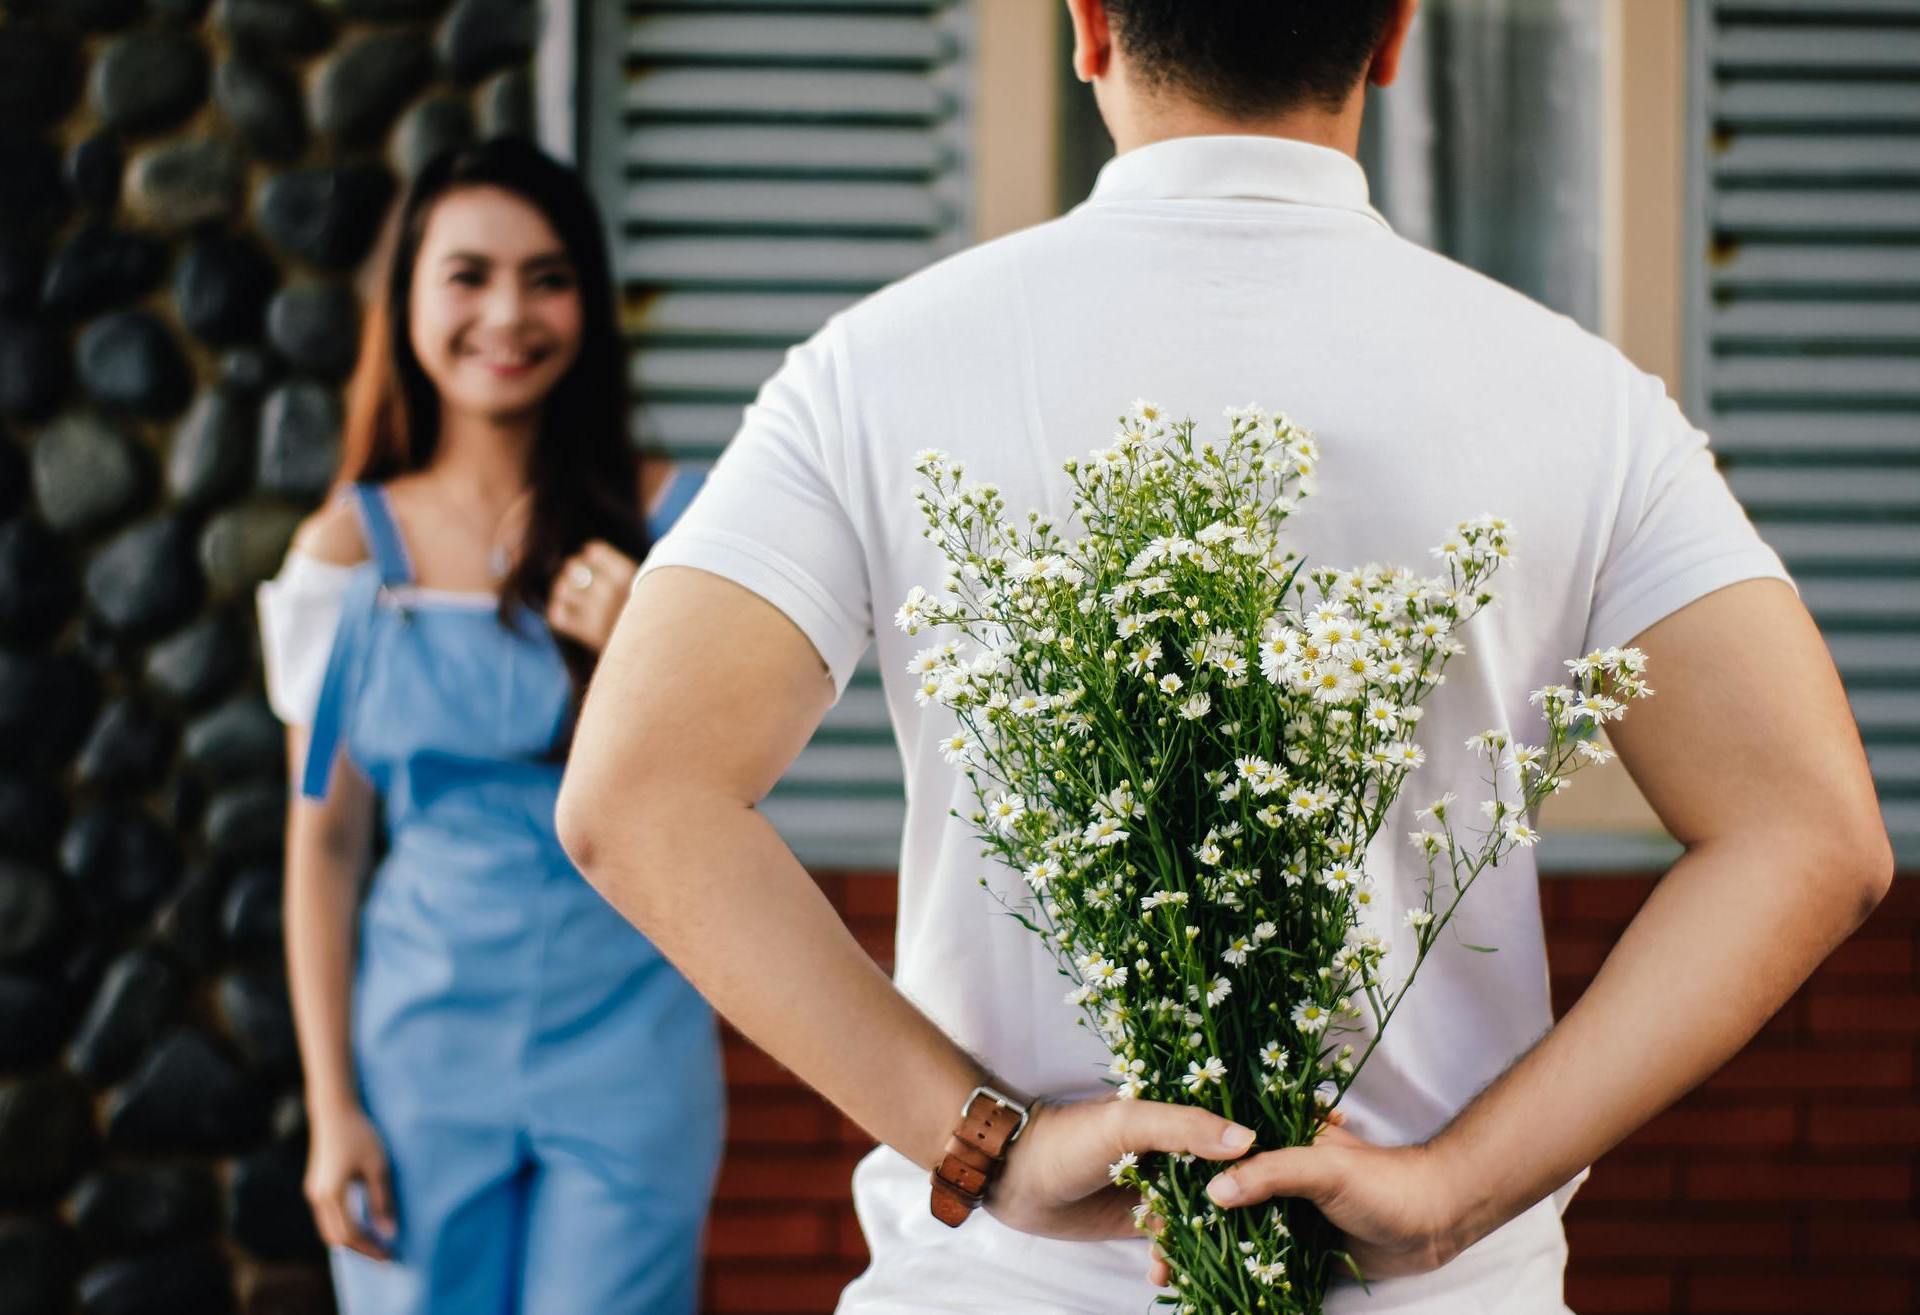 Man holding beautiful flowers behind his back, about to surprise a girl.